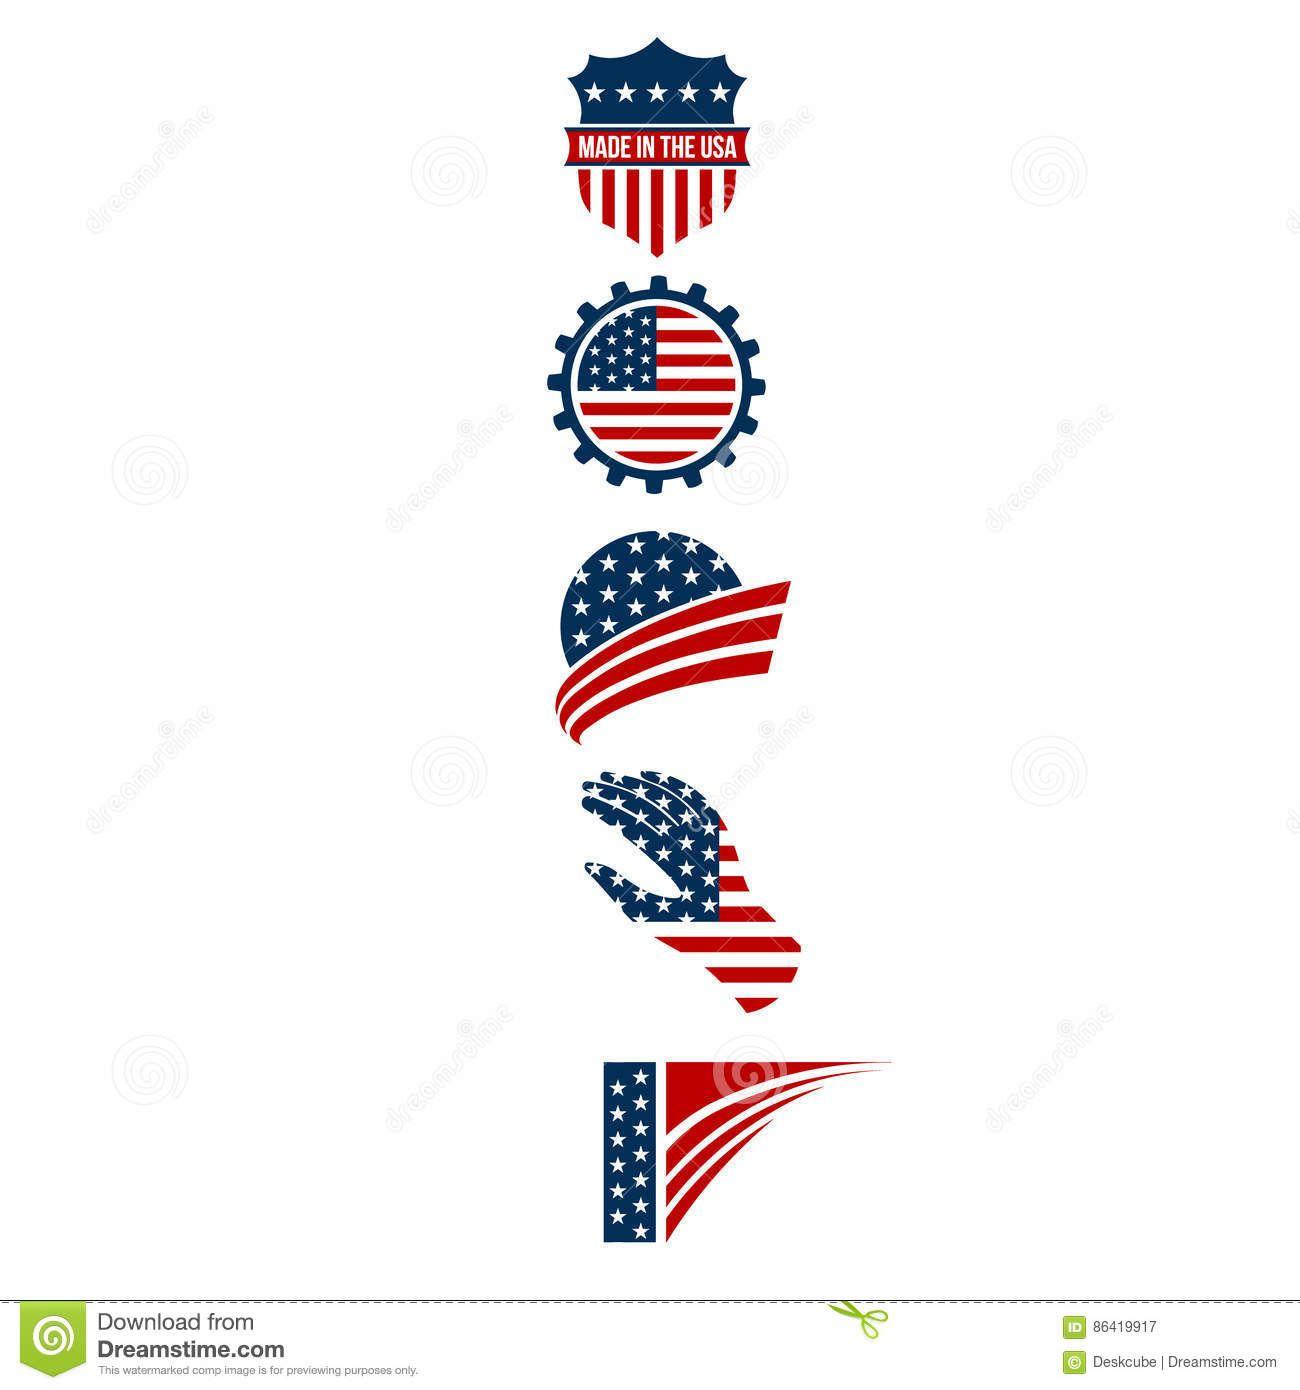 Red White Blue Usa Logo - USA Symbols in Red, White and Blue Stripes Design | Logo in ...